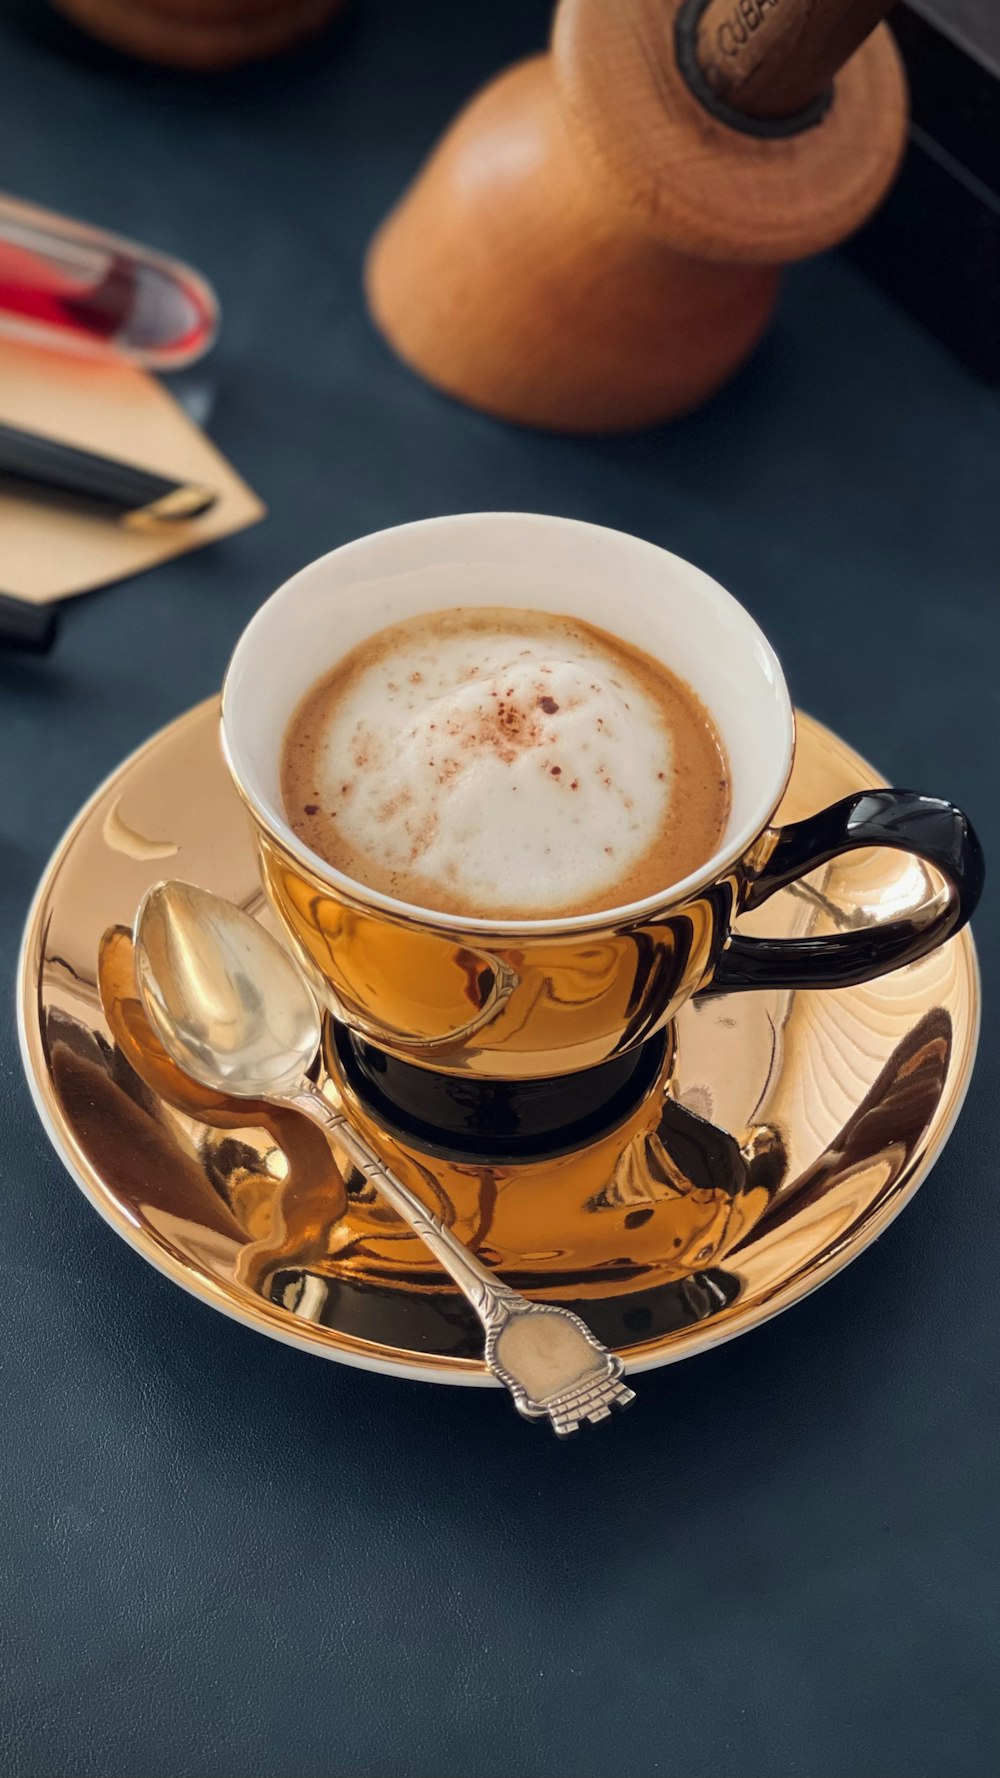 a cup of cappuccino on a saucer